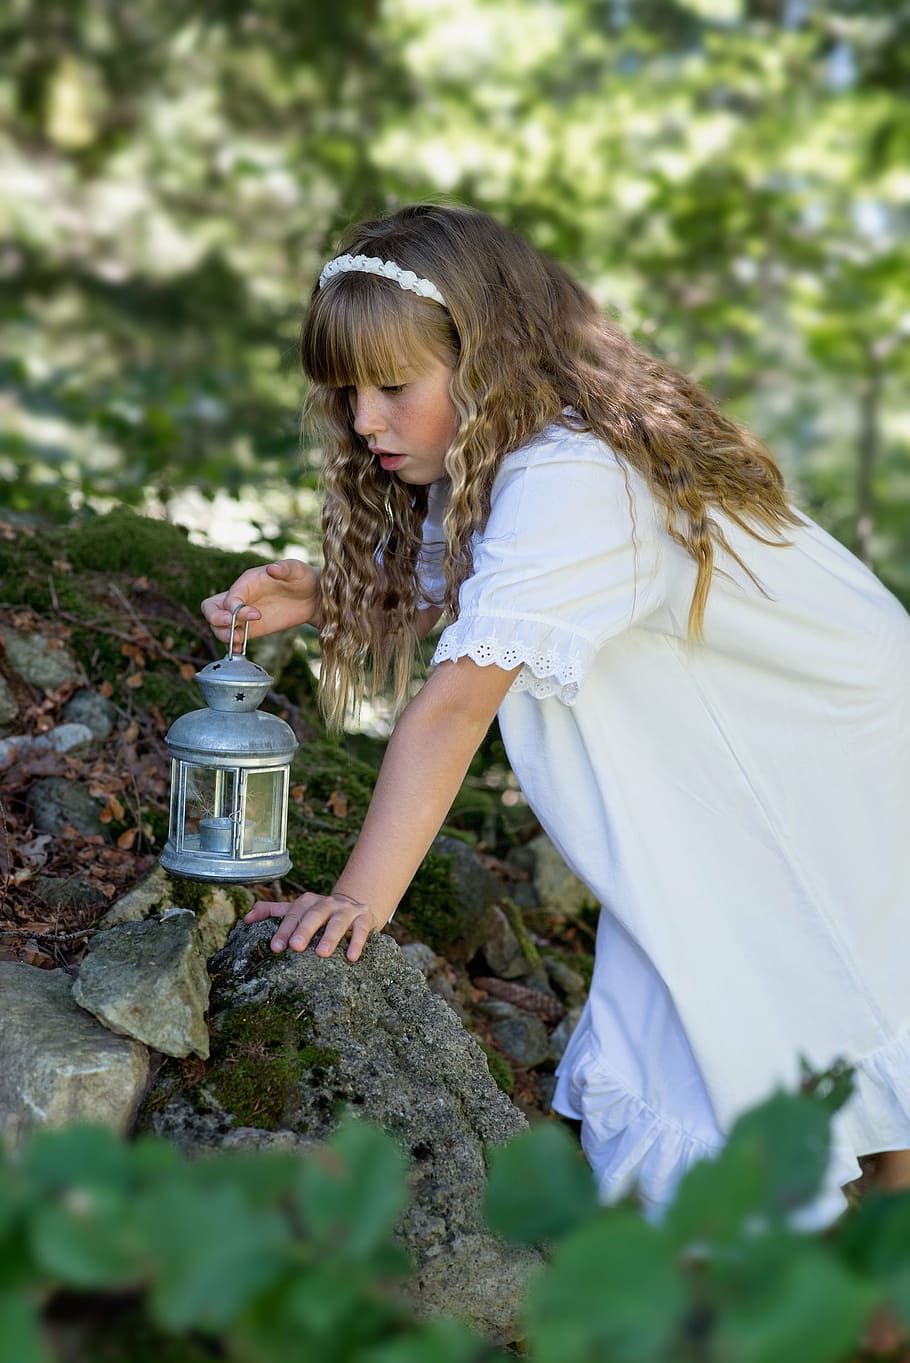 shallow focus photography of girl wearing white dress holding silver-colored kerosene lamp on her right hand during daytime, HD wallpaper